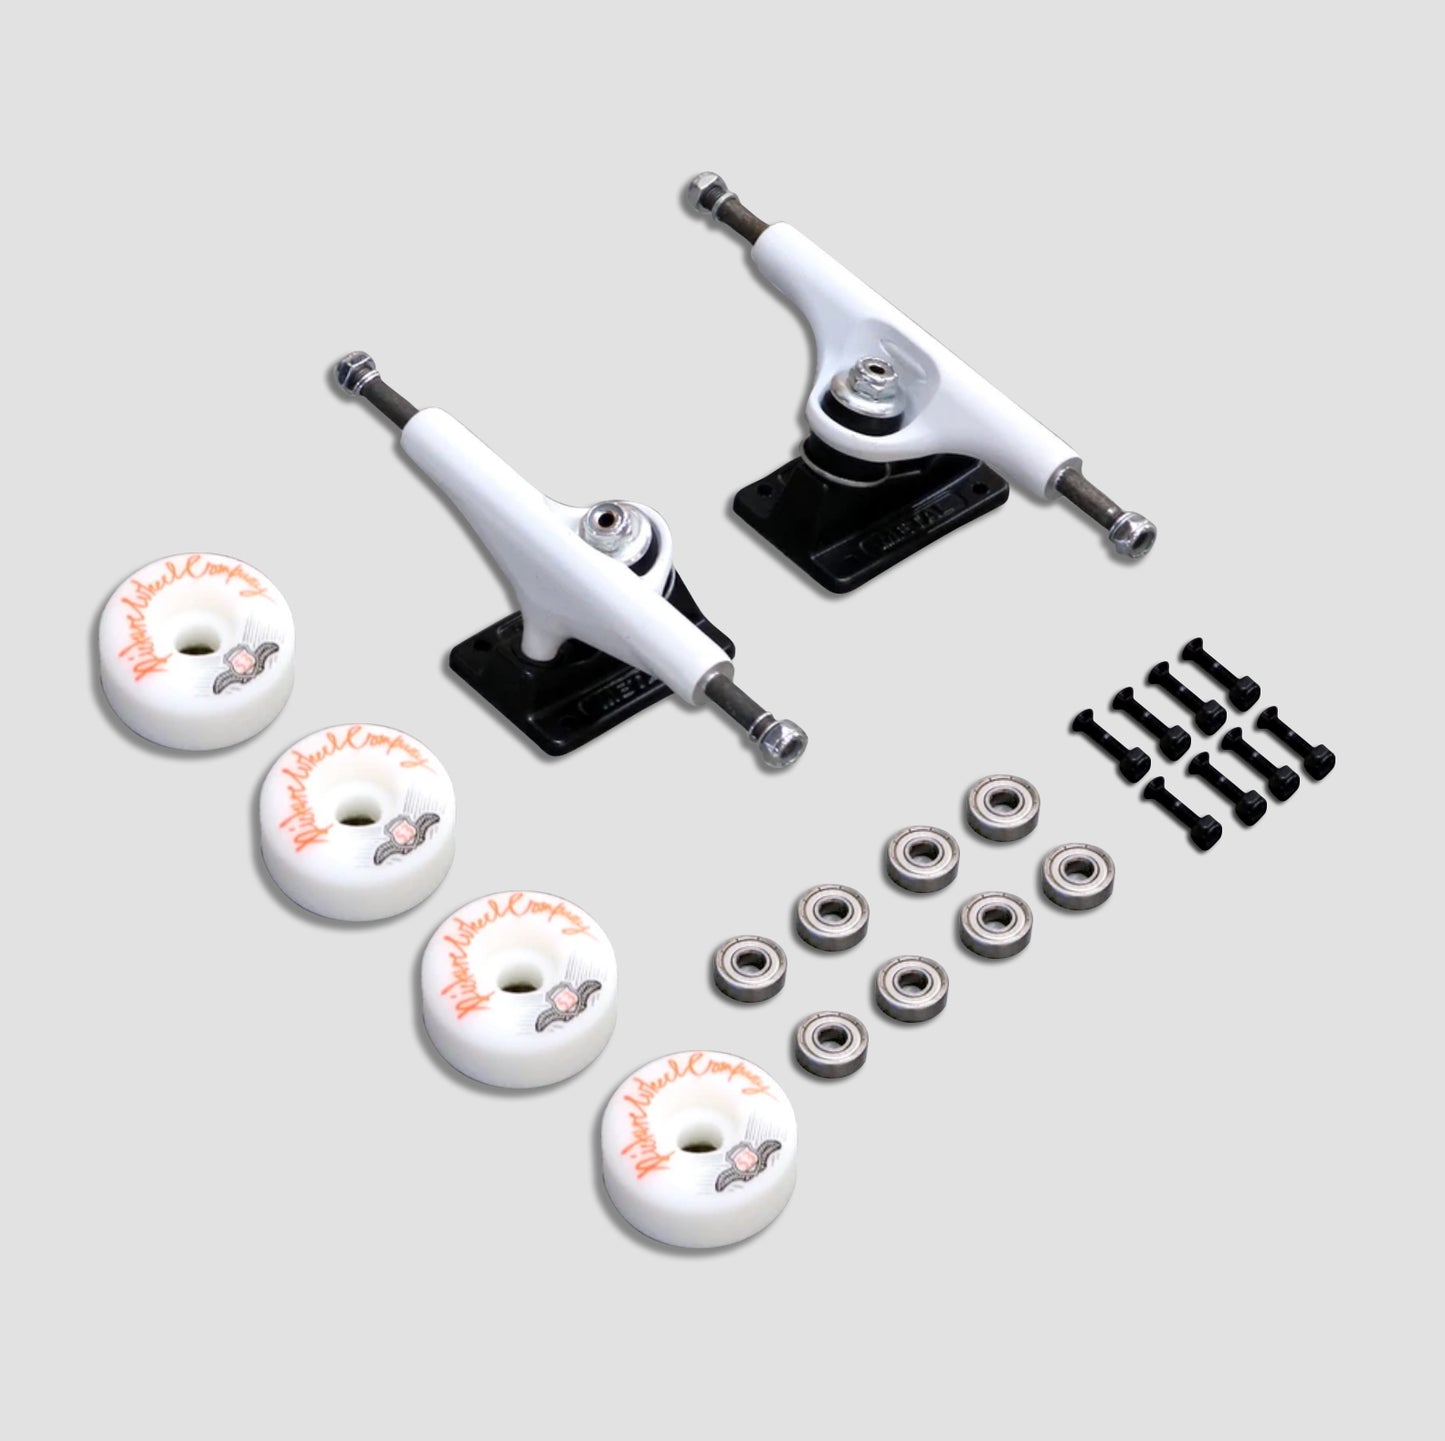 PICTURE WHEEL COMPANY UNDERCARRIAGE KIT 5.25" (7.75"- 8.25") WHITE/BLACK 53MM